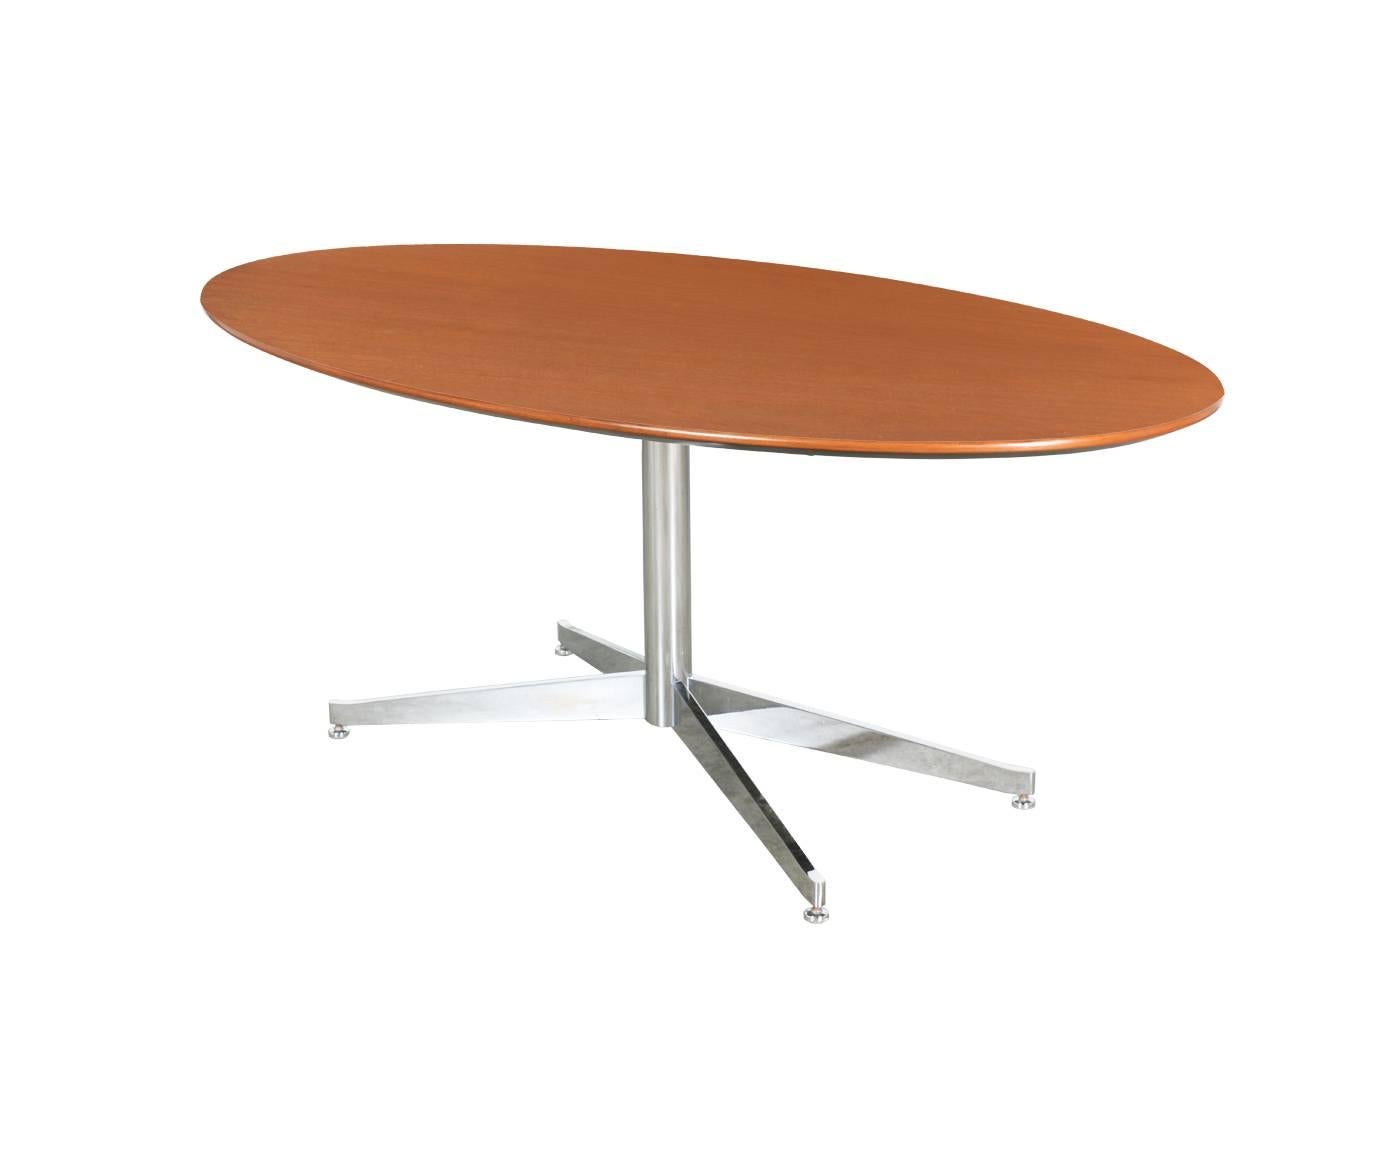 Designer: Florence Knoll.
Manufacturer: Knoll International.
Period/Style: Mid-Century Modern.
Country: United States.
Date: 1960s.

Dimensions: 29″ H x 72″ W x 42″ D
Materials: Walnut, Steel Chrome.
Condition: Excellent – Newly